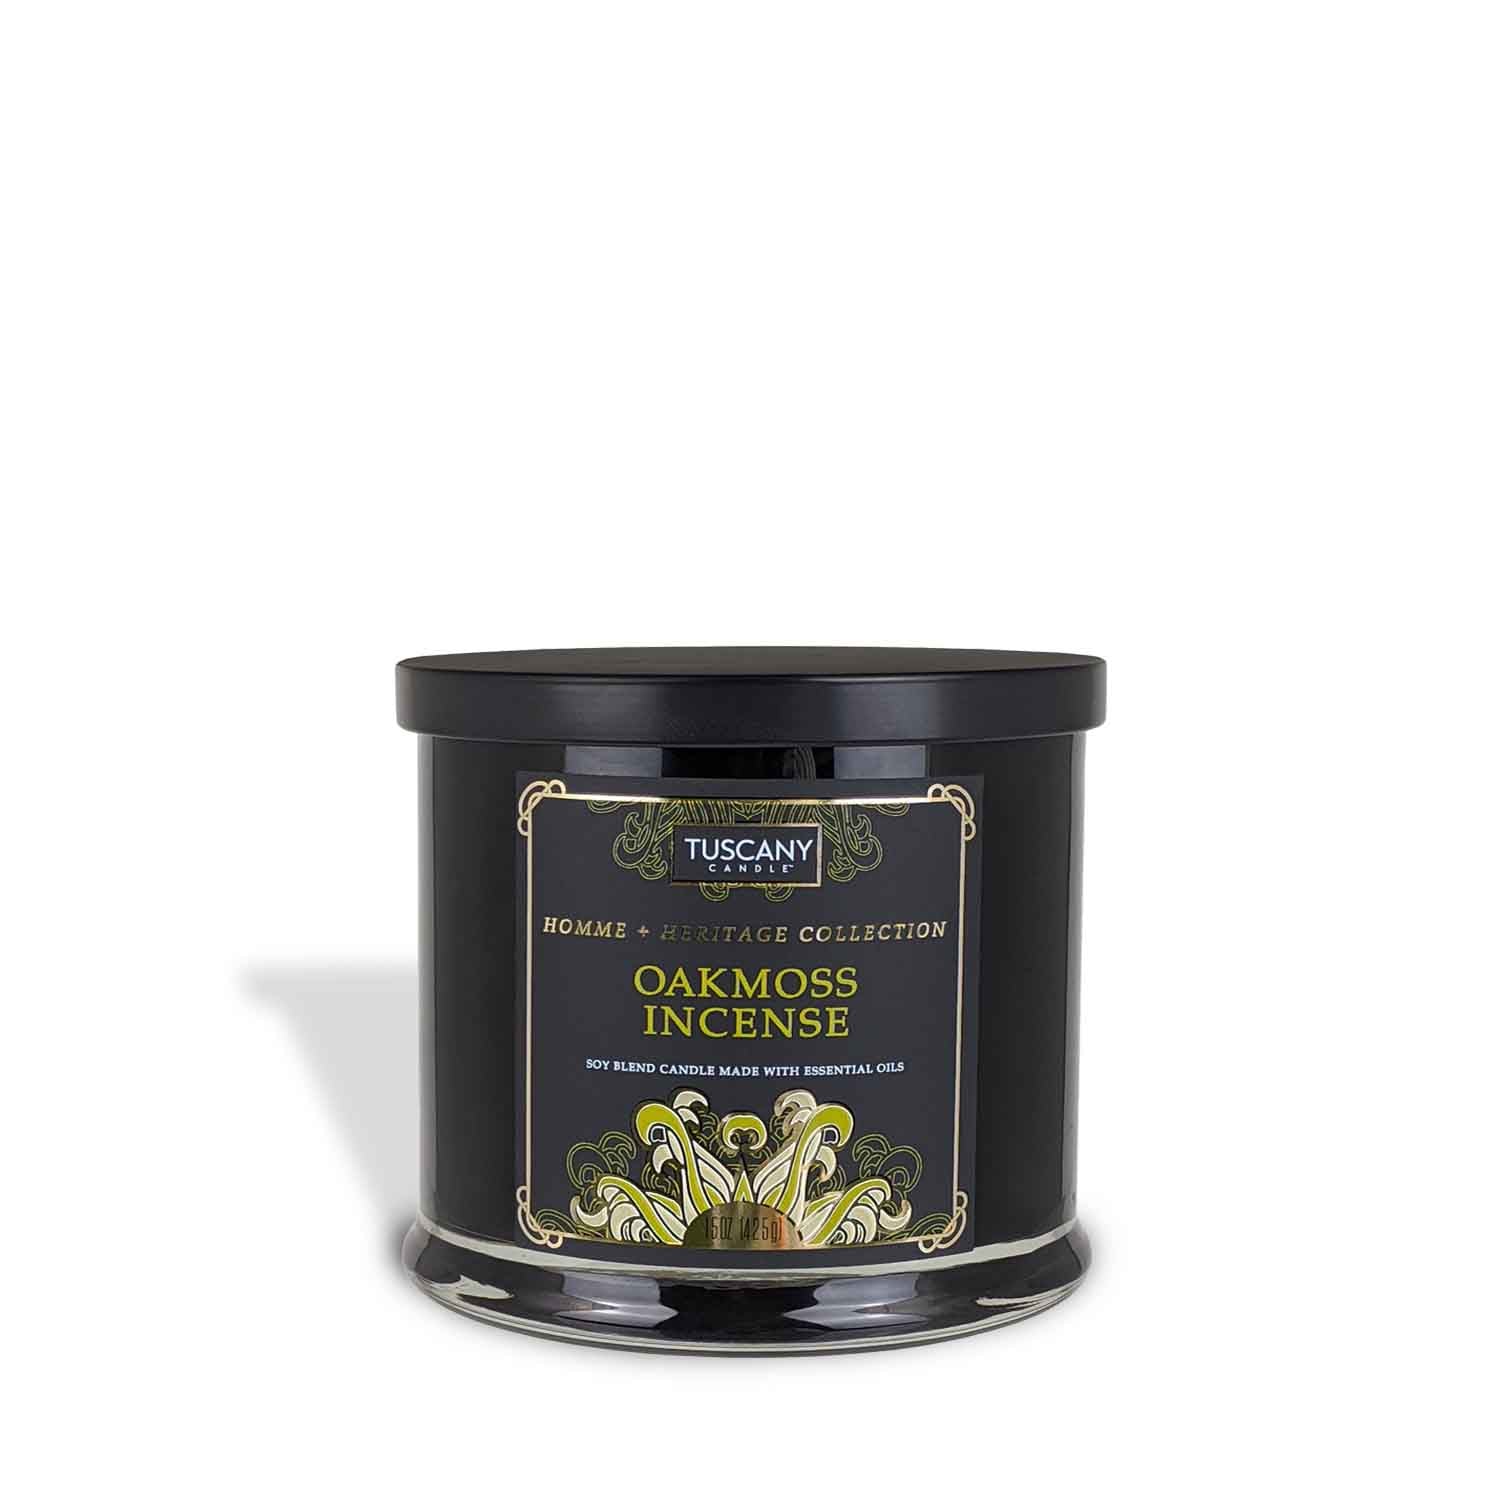 A black tin with an Oakmoss Incense Scented Jar Candle (15 oz) – Homme + Heritage Collection by Tuscany Candle in it.